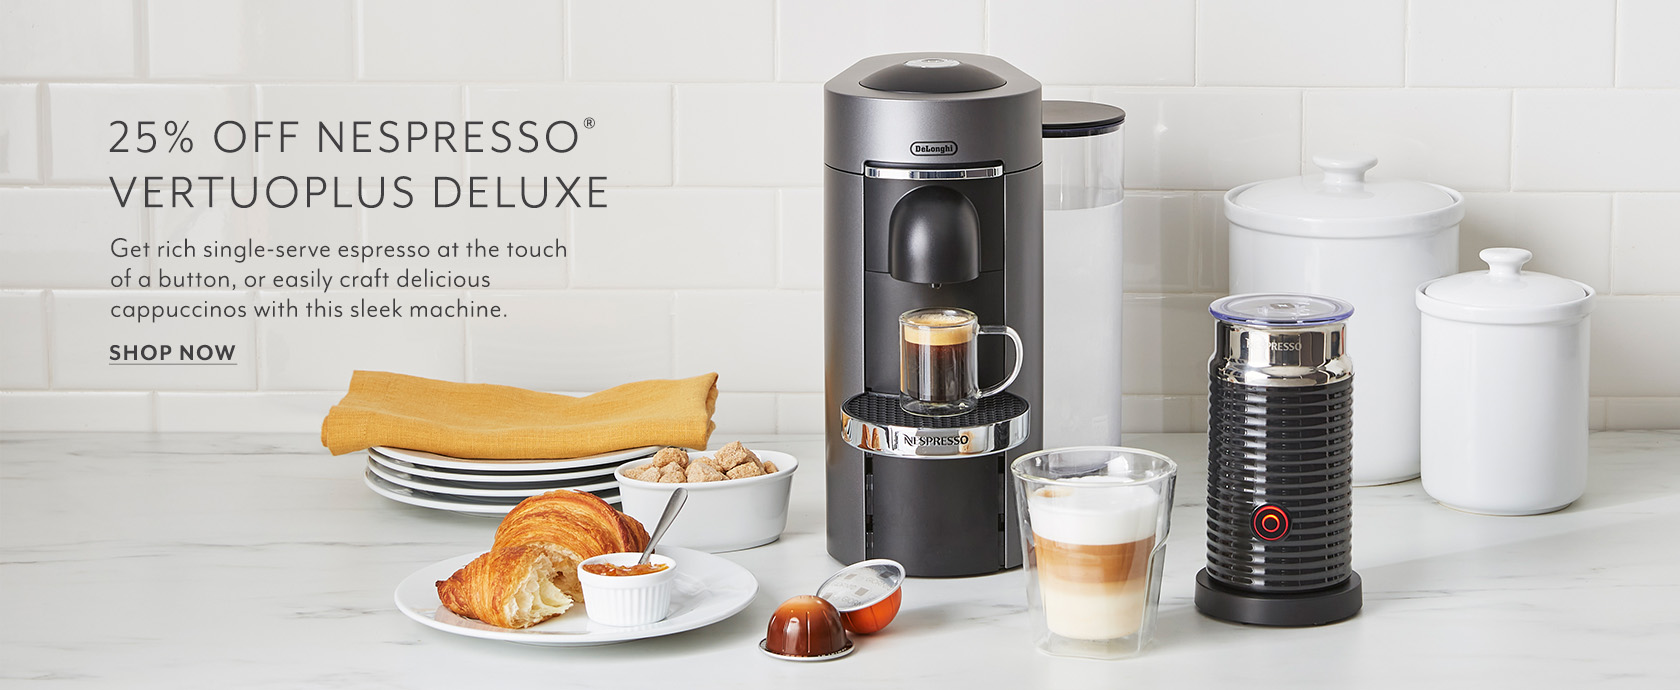 25% off Nespresso Vertuoplus Deluxe. Get rich single-serve espresso at the touch of a button, or easily craft delicious cappuccinos with this sleek machine. Shop Now.